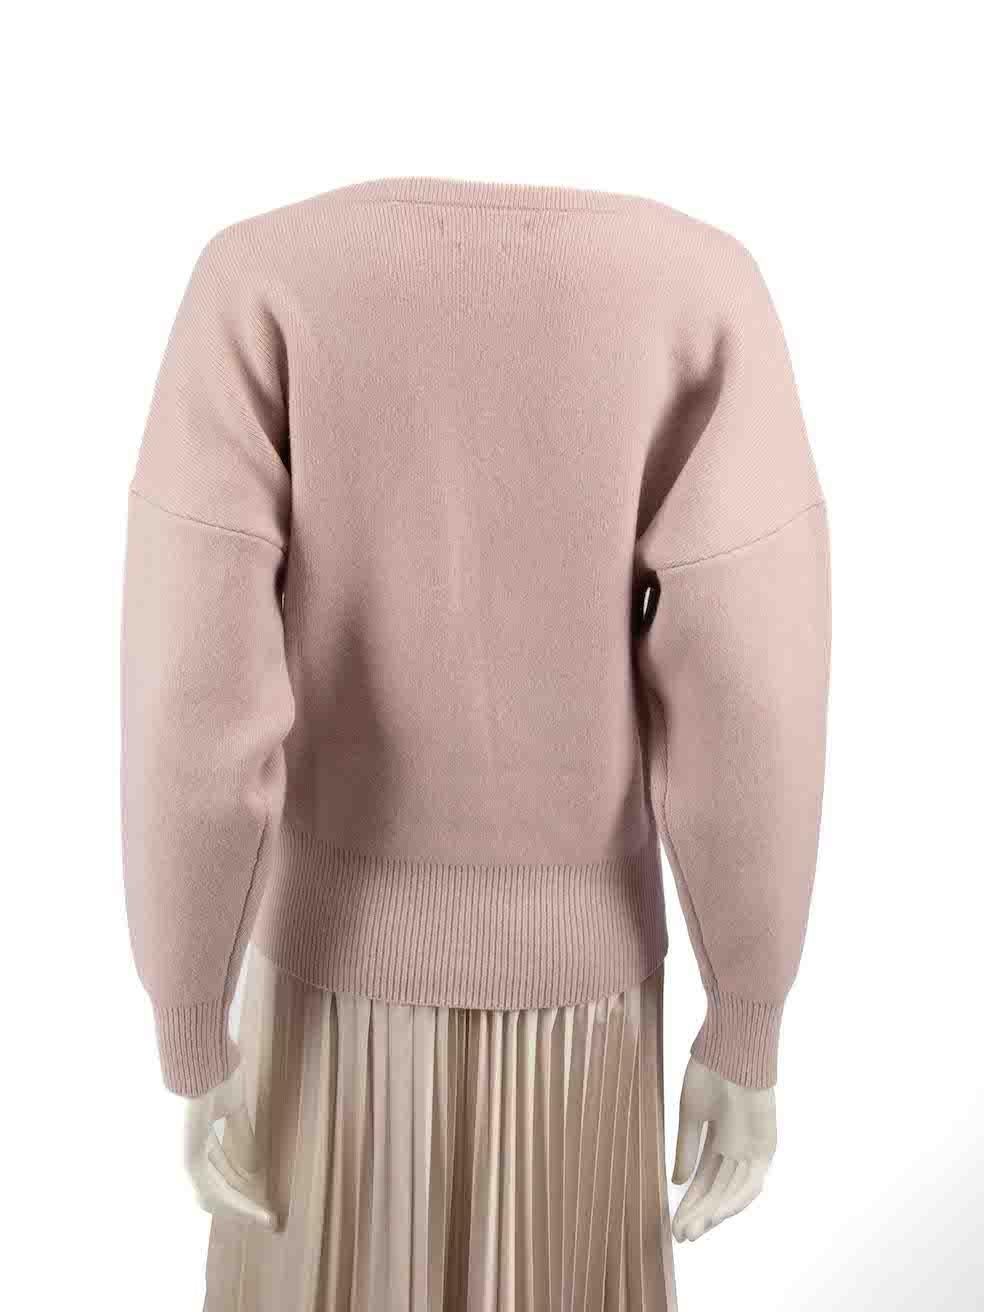 Isabel Marant Pink Wool Knit Jumper Size XS In Excellent Condition For Sale In London, GB